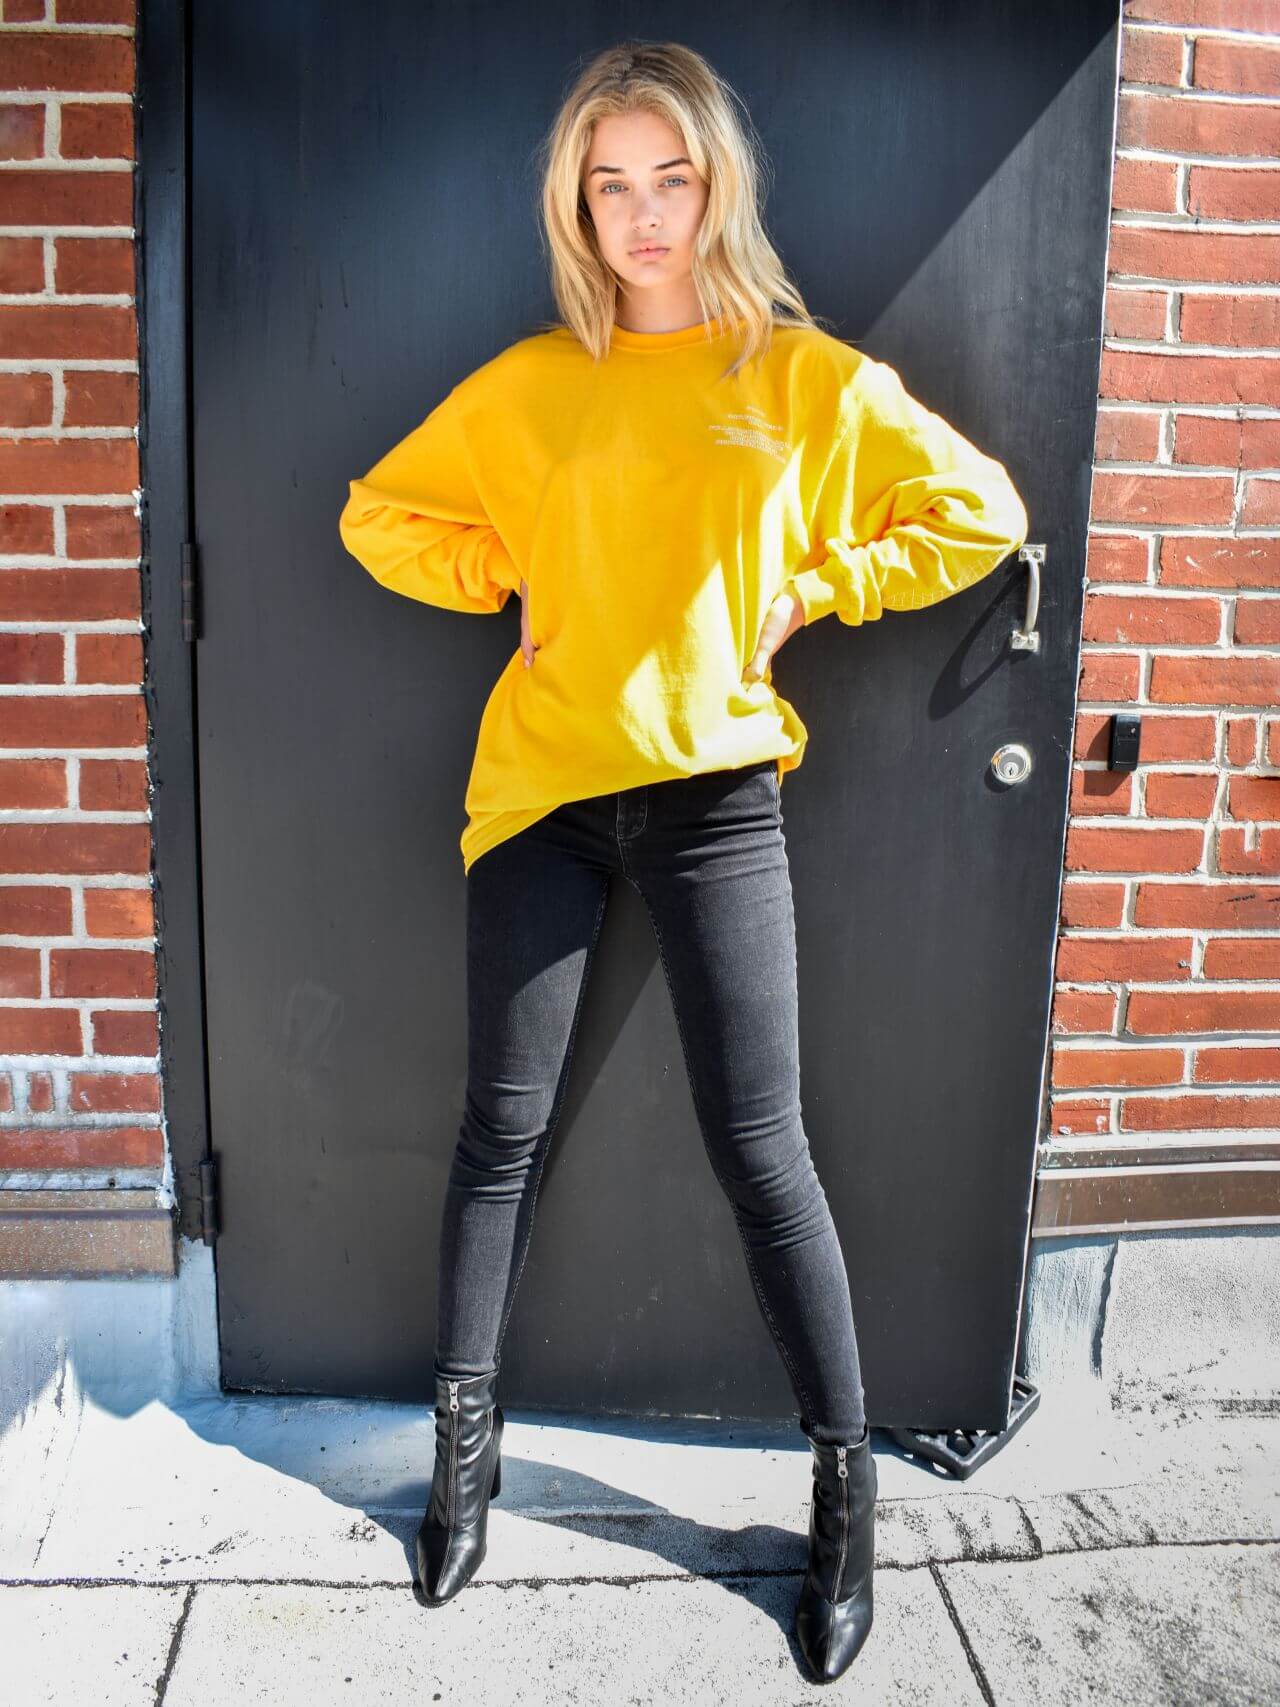 Carolina Marie Lovely Looks In Yellow Full Sleeves Sweatshirts With Black Jeans Outfits